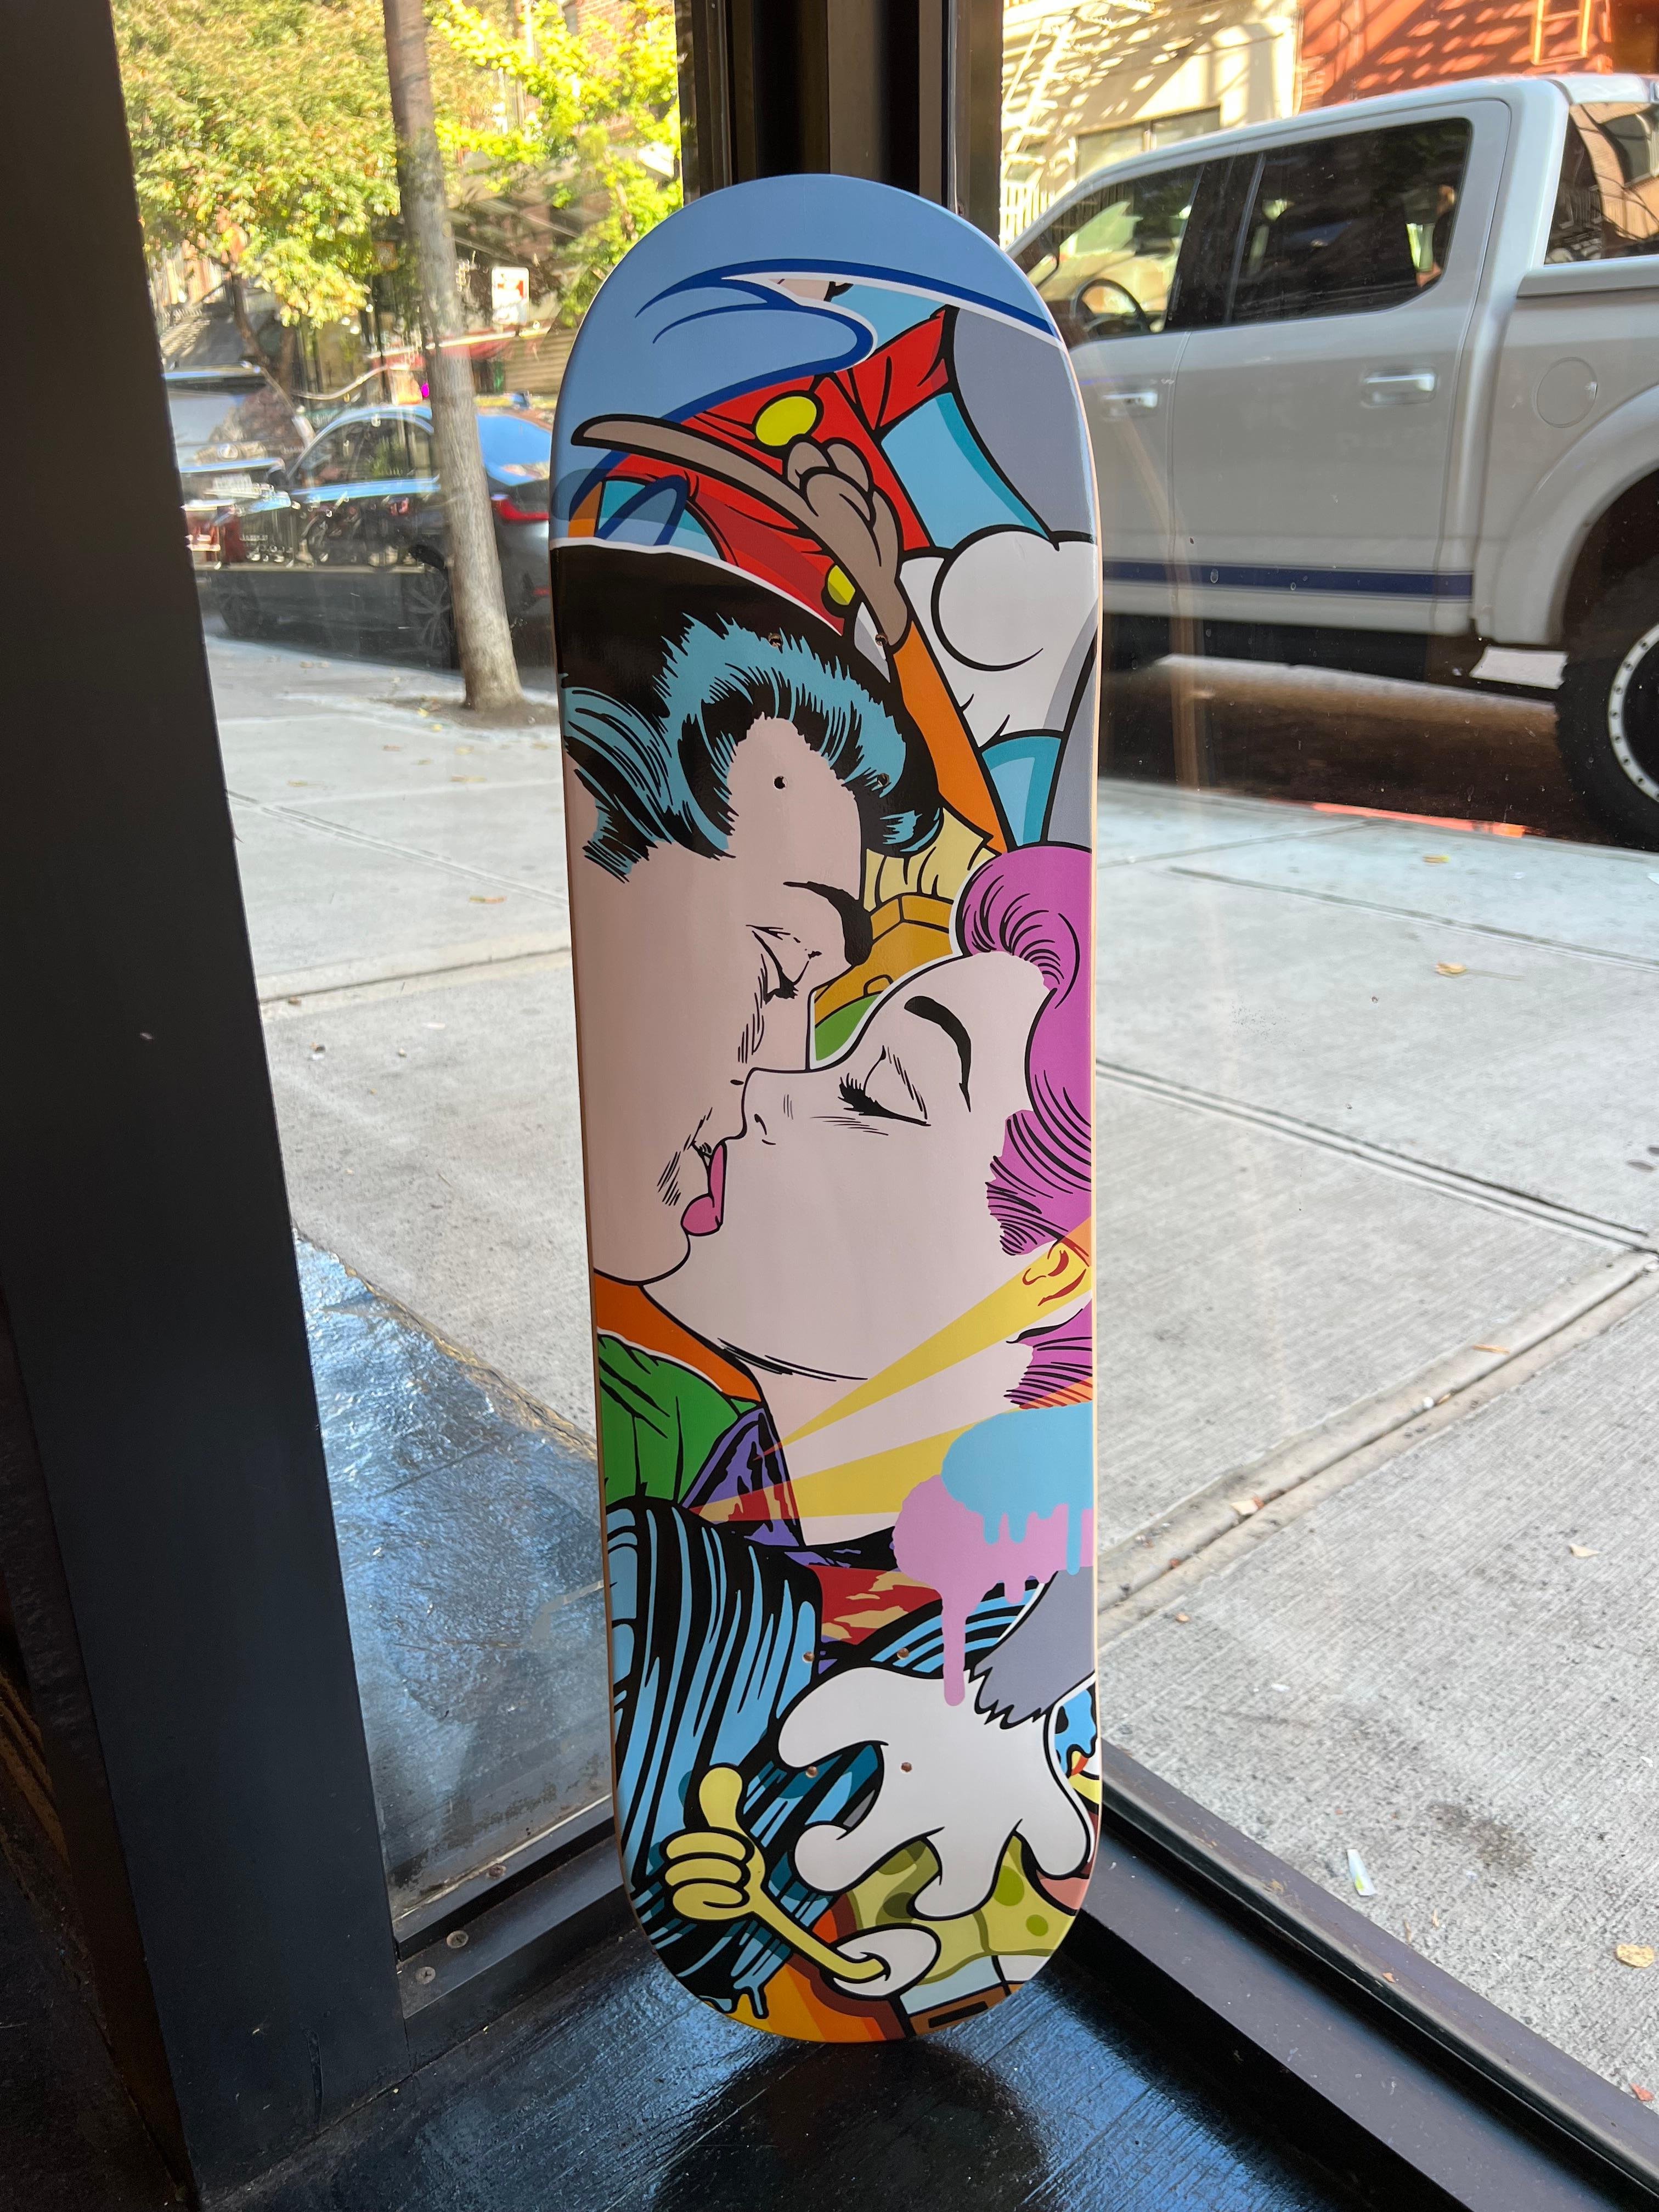 Skatedeck edition of 100 - wrapped in plastic

In 1999 BustArt began his artistic career with classic Graffiti. Until 2005, he became familiar with the whole spectrum of Graffiti and reached a new level of identification with the various facets of